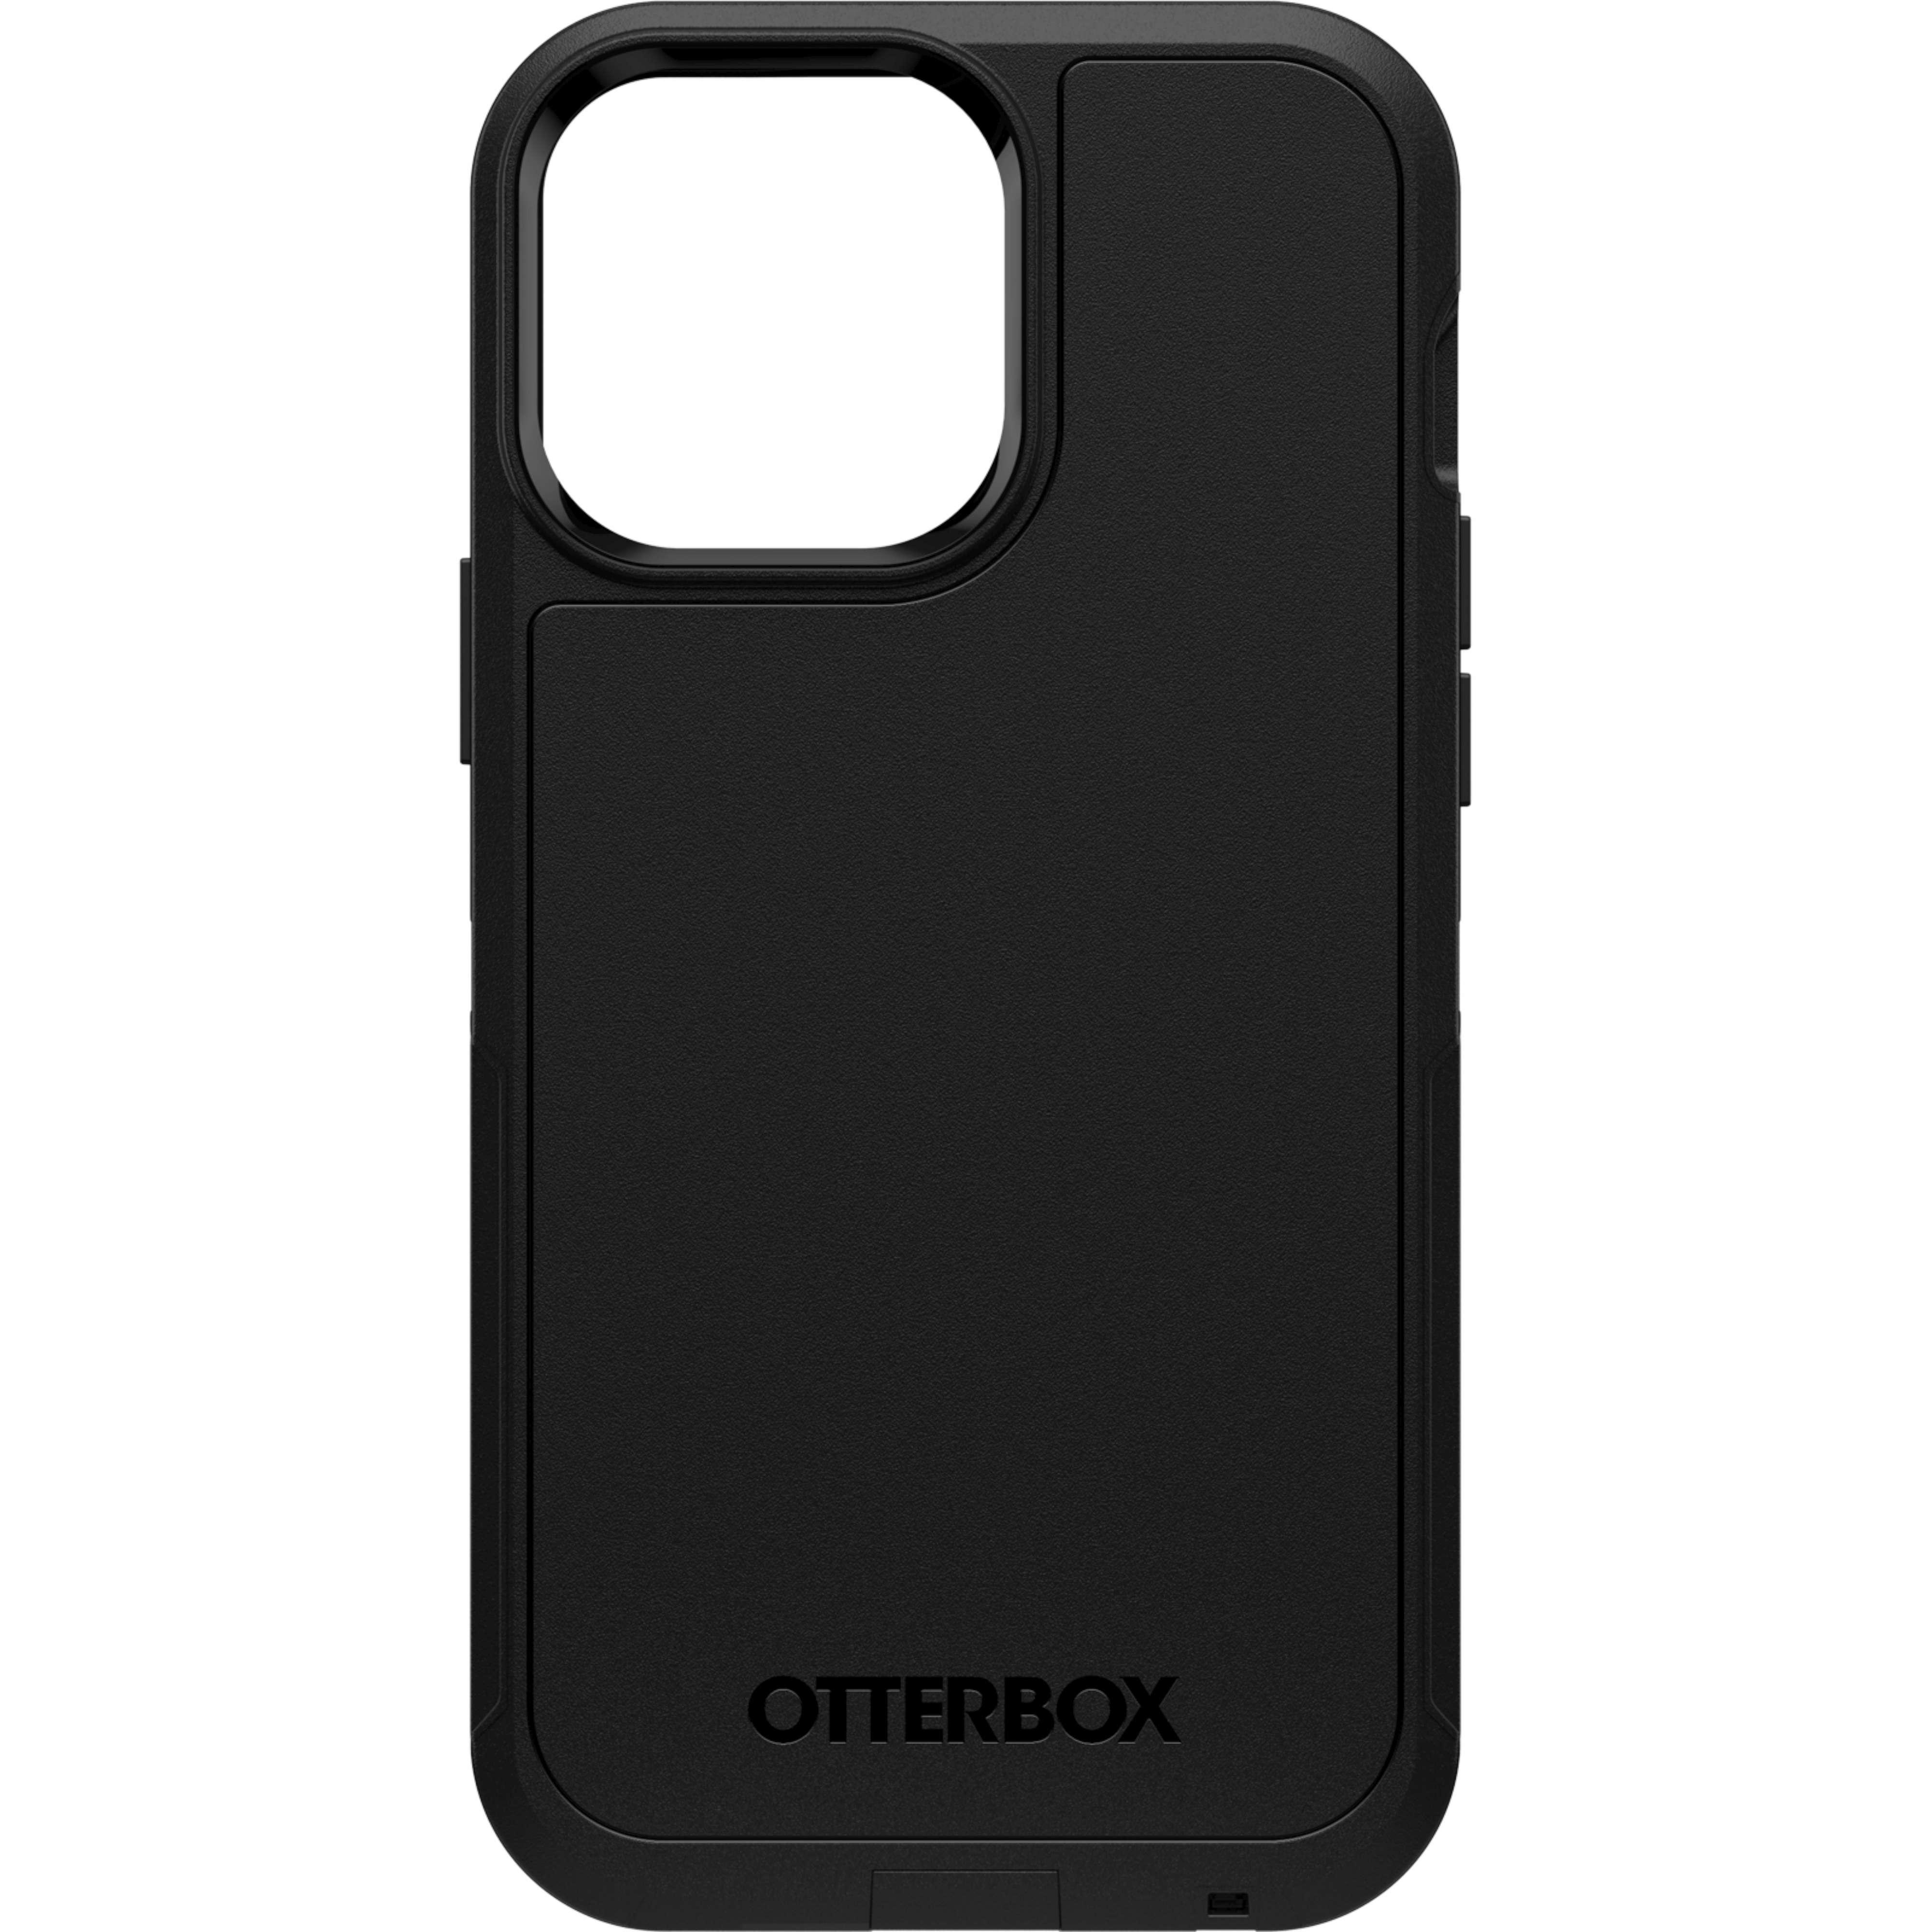 OTTERBOX Defender, Max, Schwarz iPhone Apple, Backcover, 13 Pro